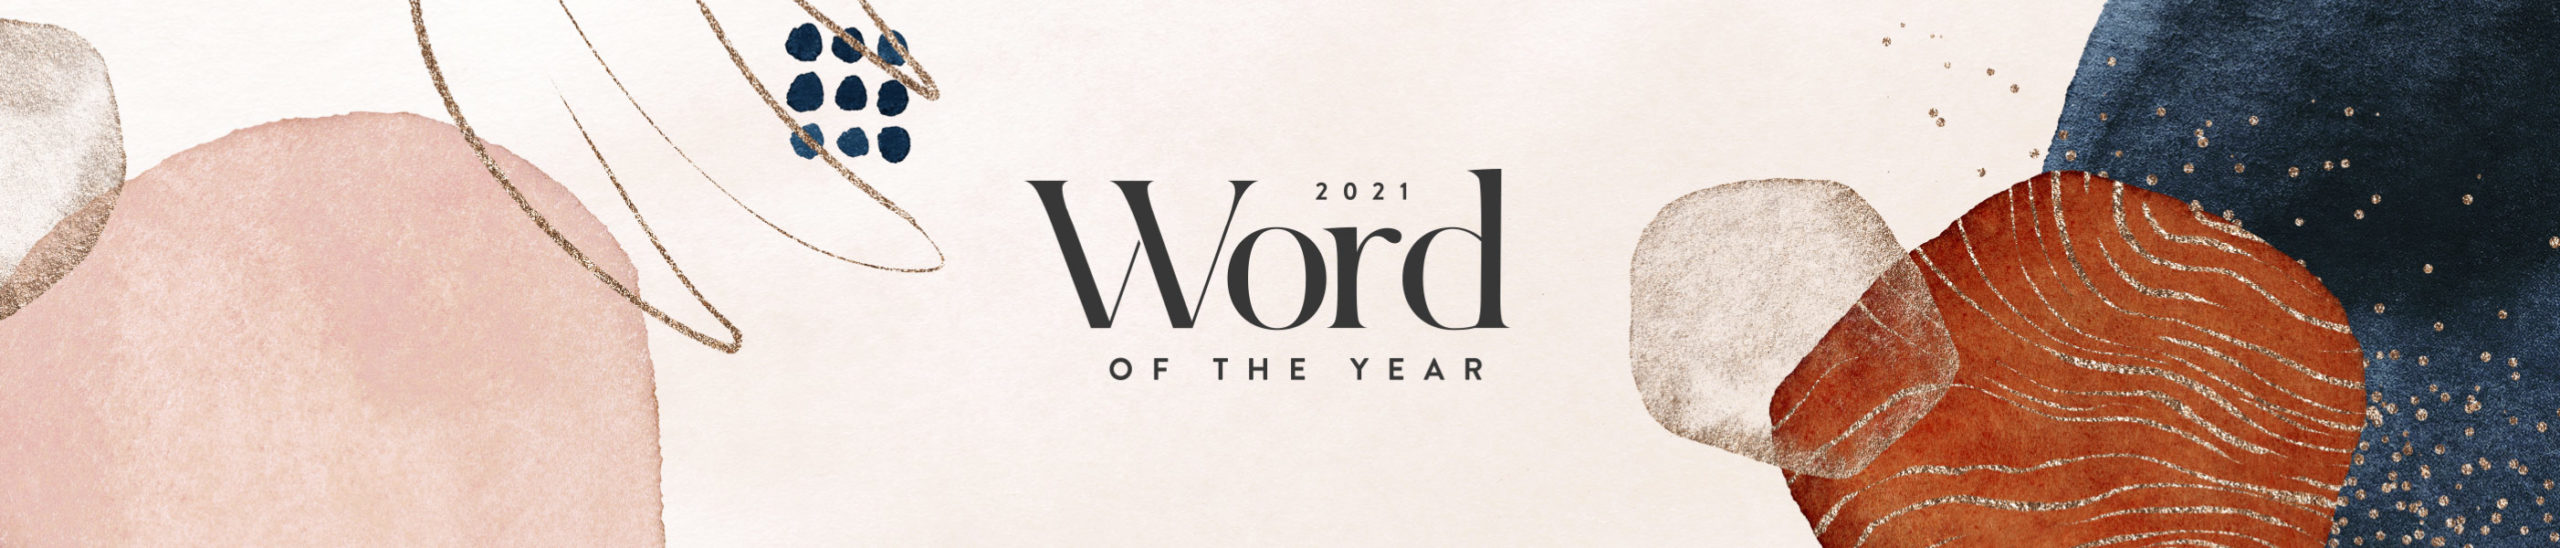 Post-Blog-You 2021 Word of the Year-AllThingsFaithful